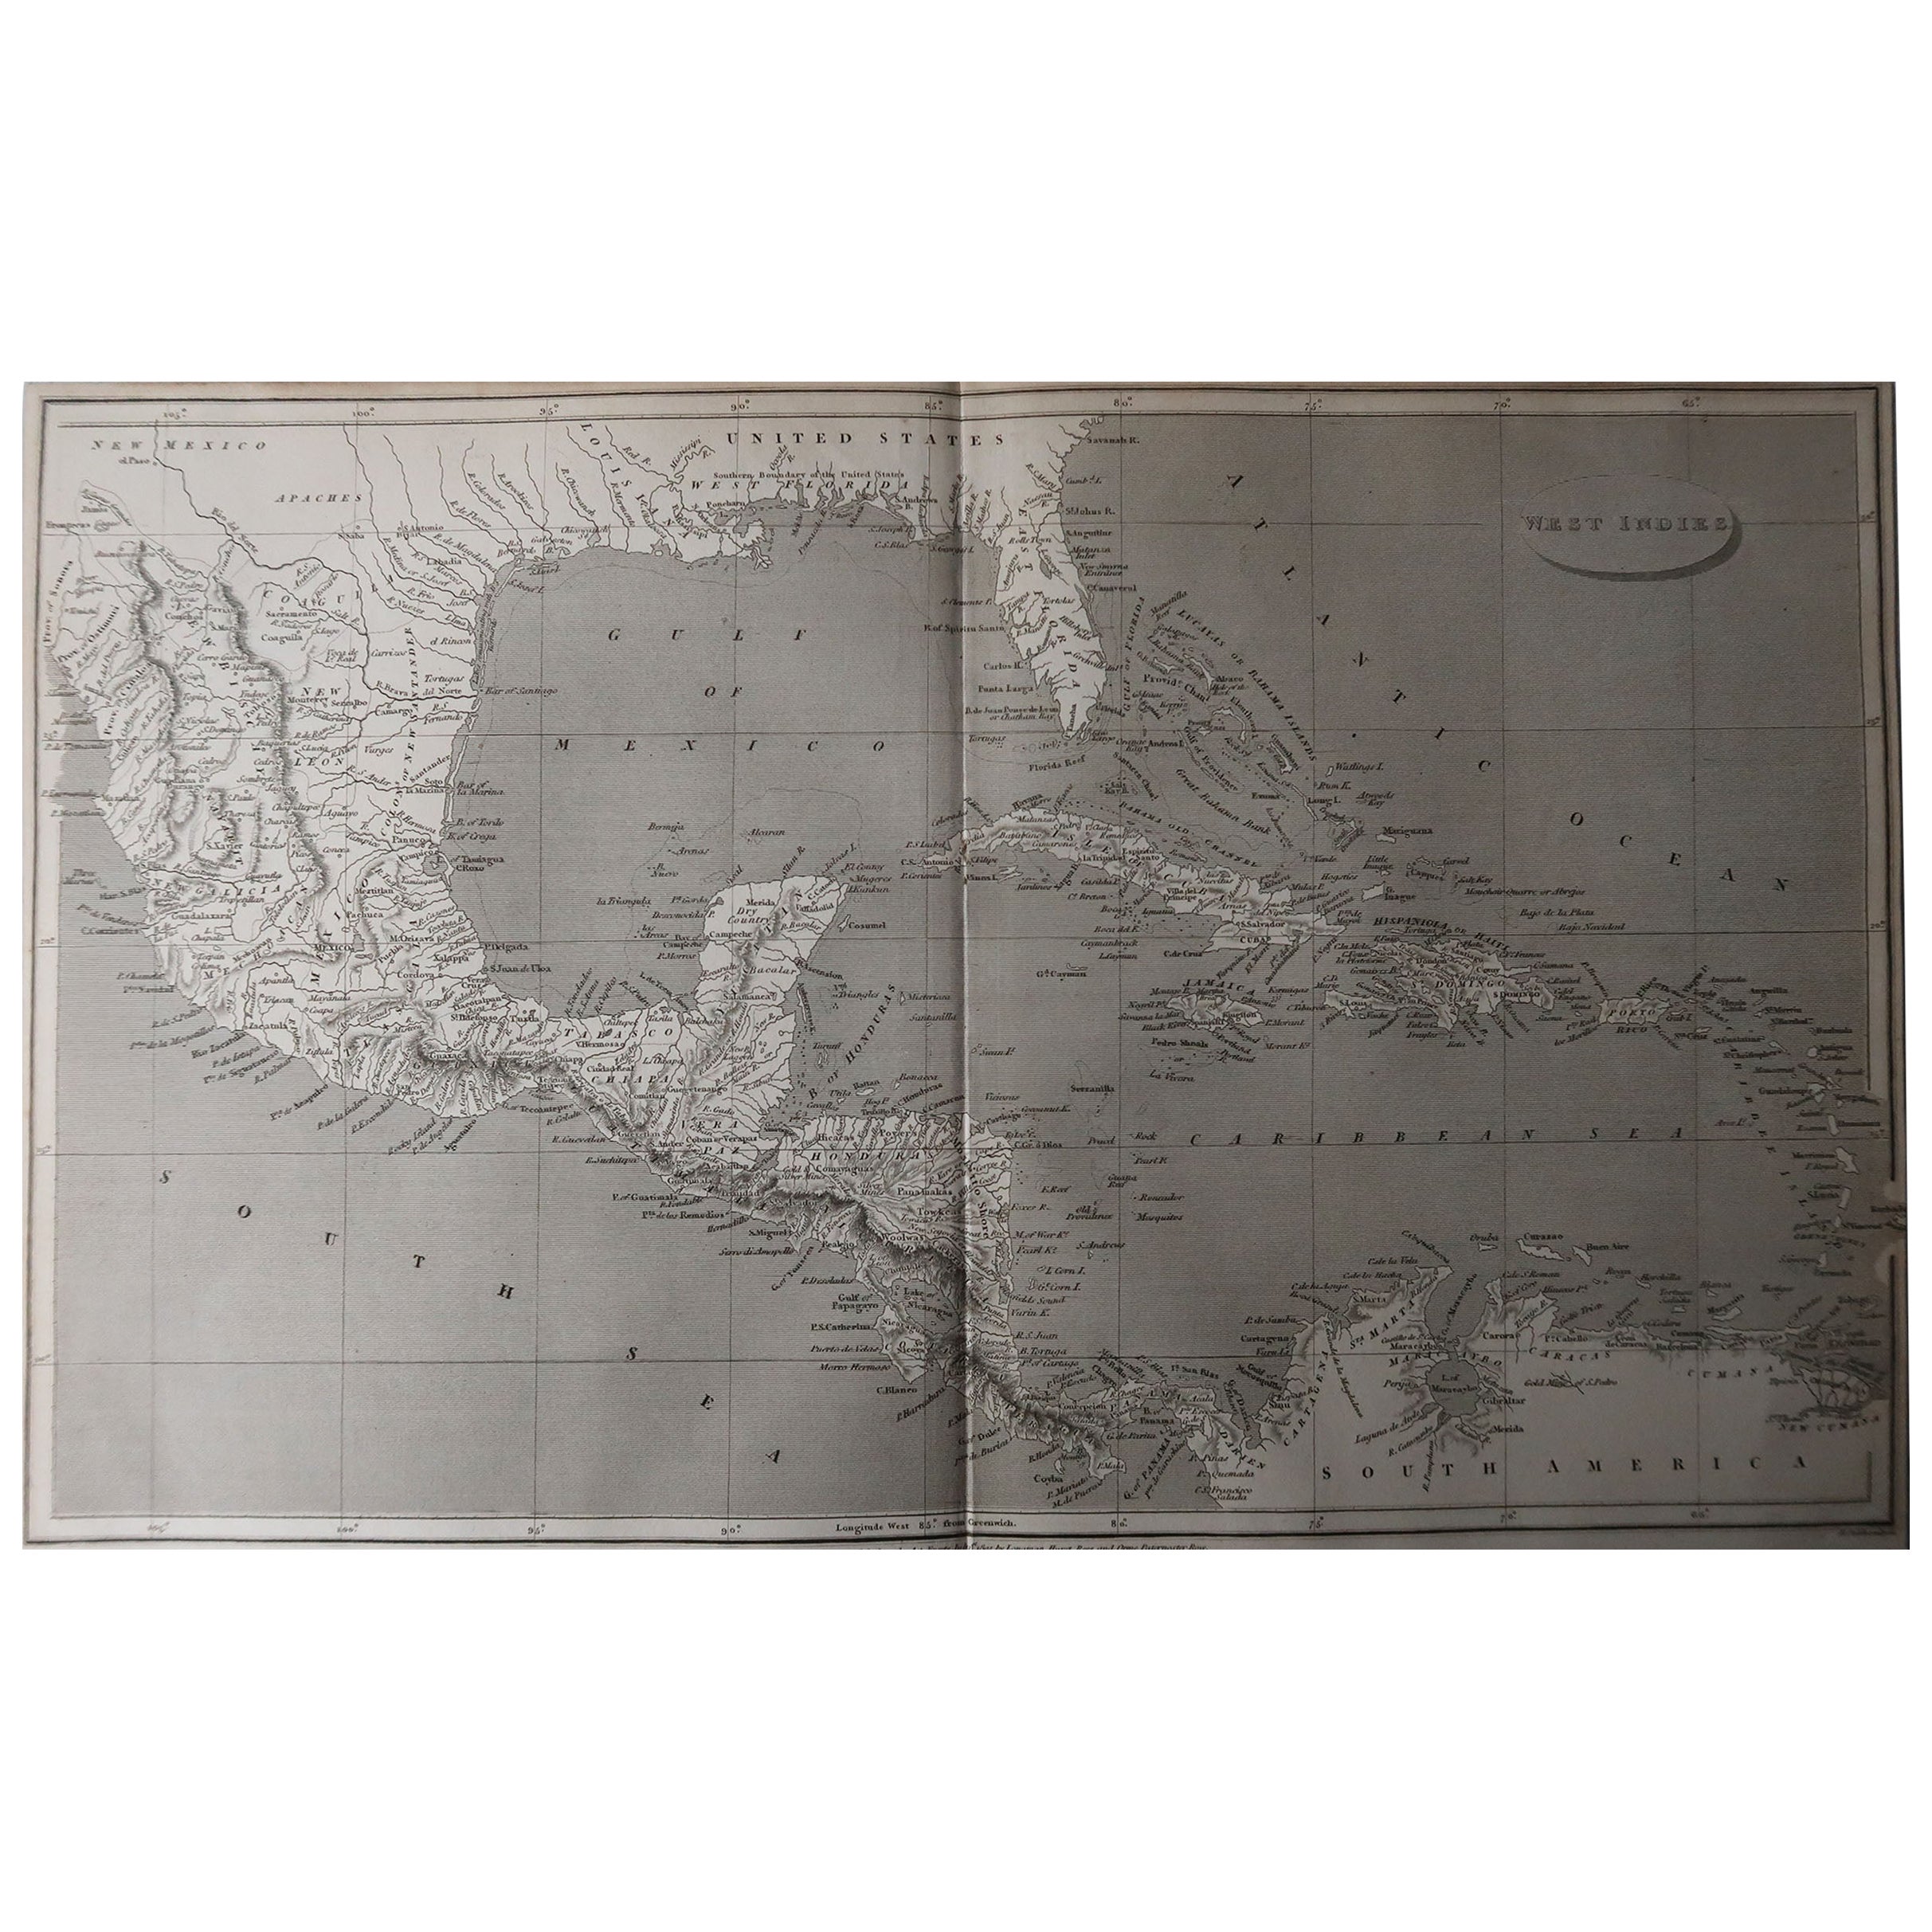 Great map of Central America.

Drawn under the direction of Arrowsmith.

Copper-plate engraving.

Published by Longman, Hurst, Rees, Orme and Brown, 1820

Unframed.